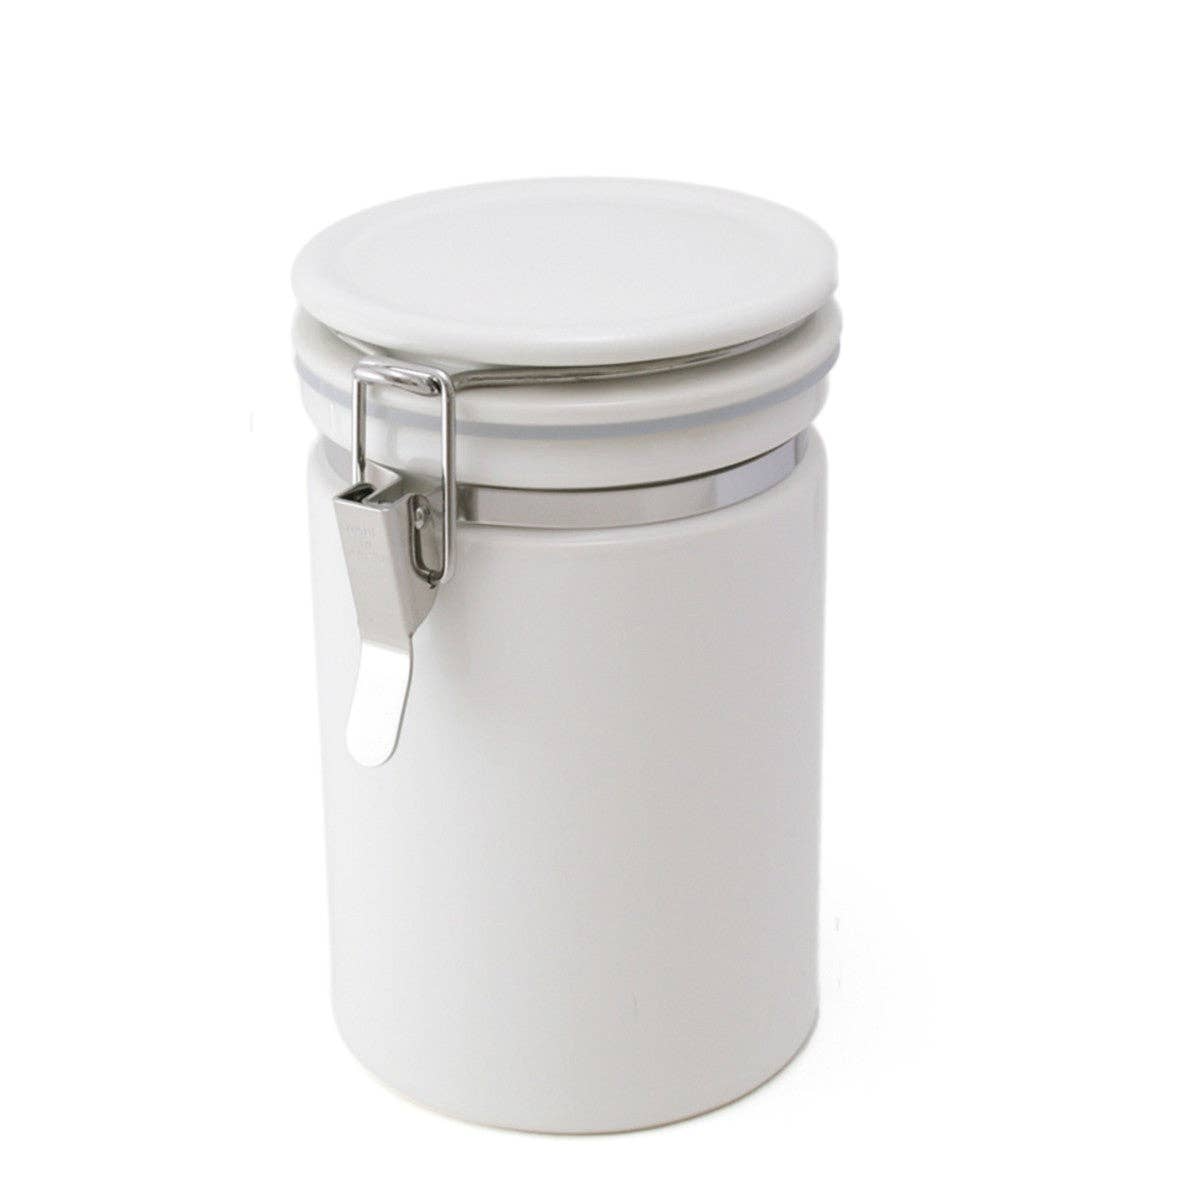 Zero Japan Coffee Canisters - 27 oz. (co-200)